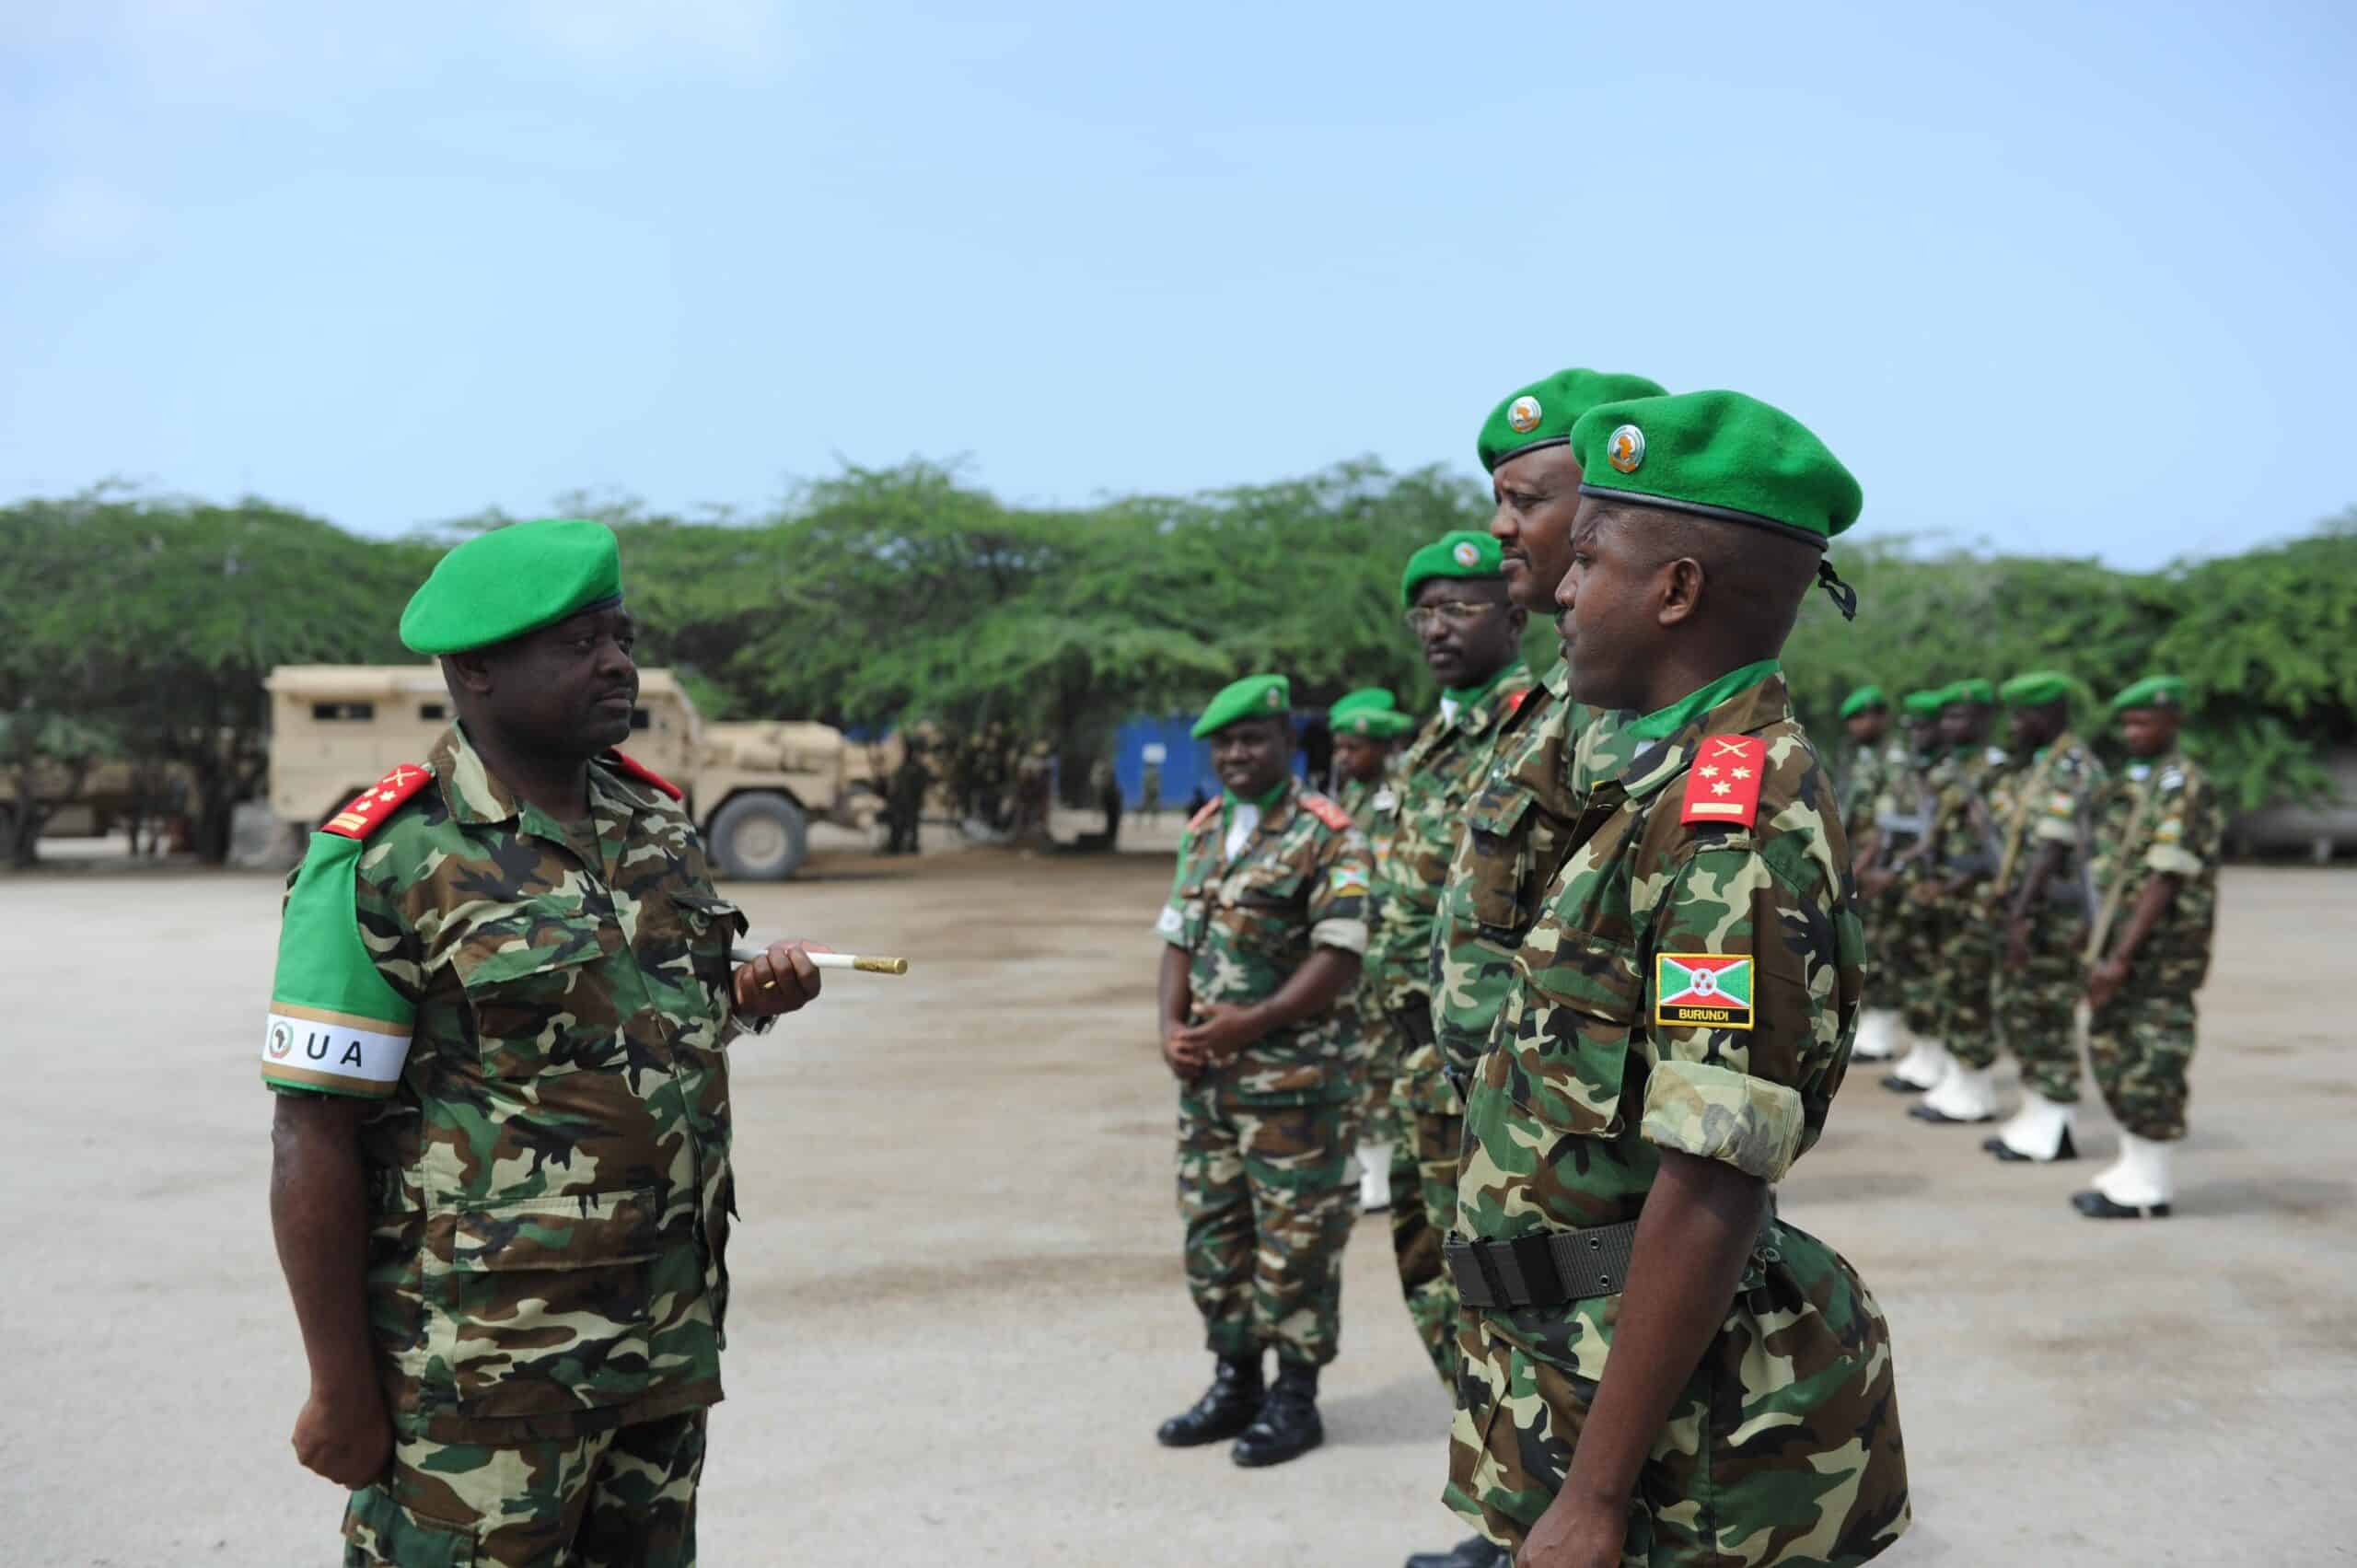 AMISOM's Force Commander, General Silas Ntigurirwa, greets officers during a ceremony to mark their rotation at Burundi's military base in Mogadishu, Somalia, on July 26. AMISOM Photo (14577825348) by AMISOM Public Information